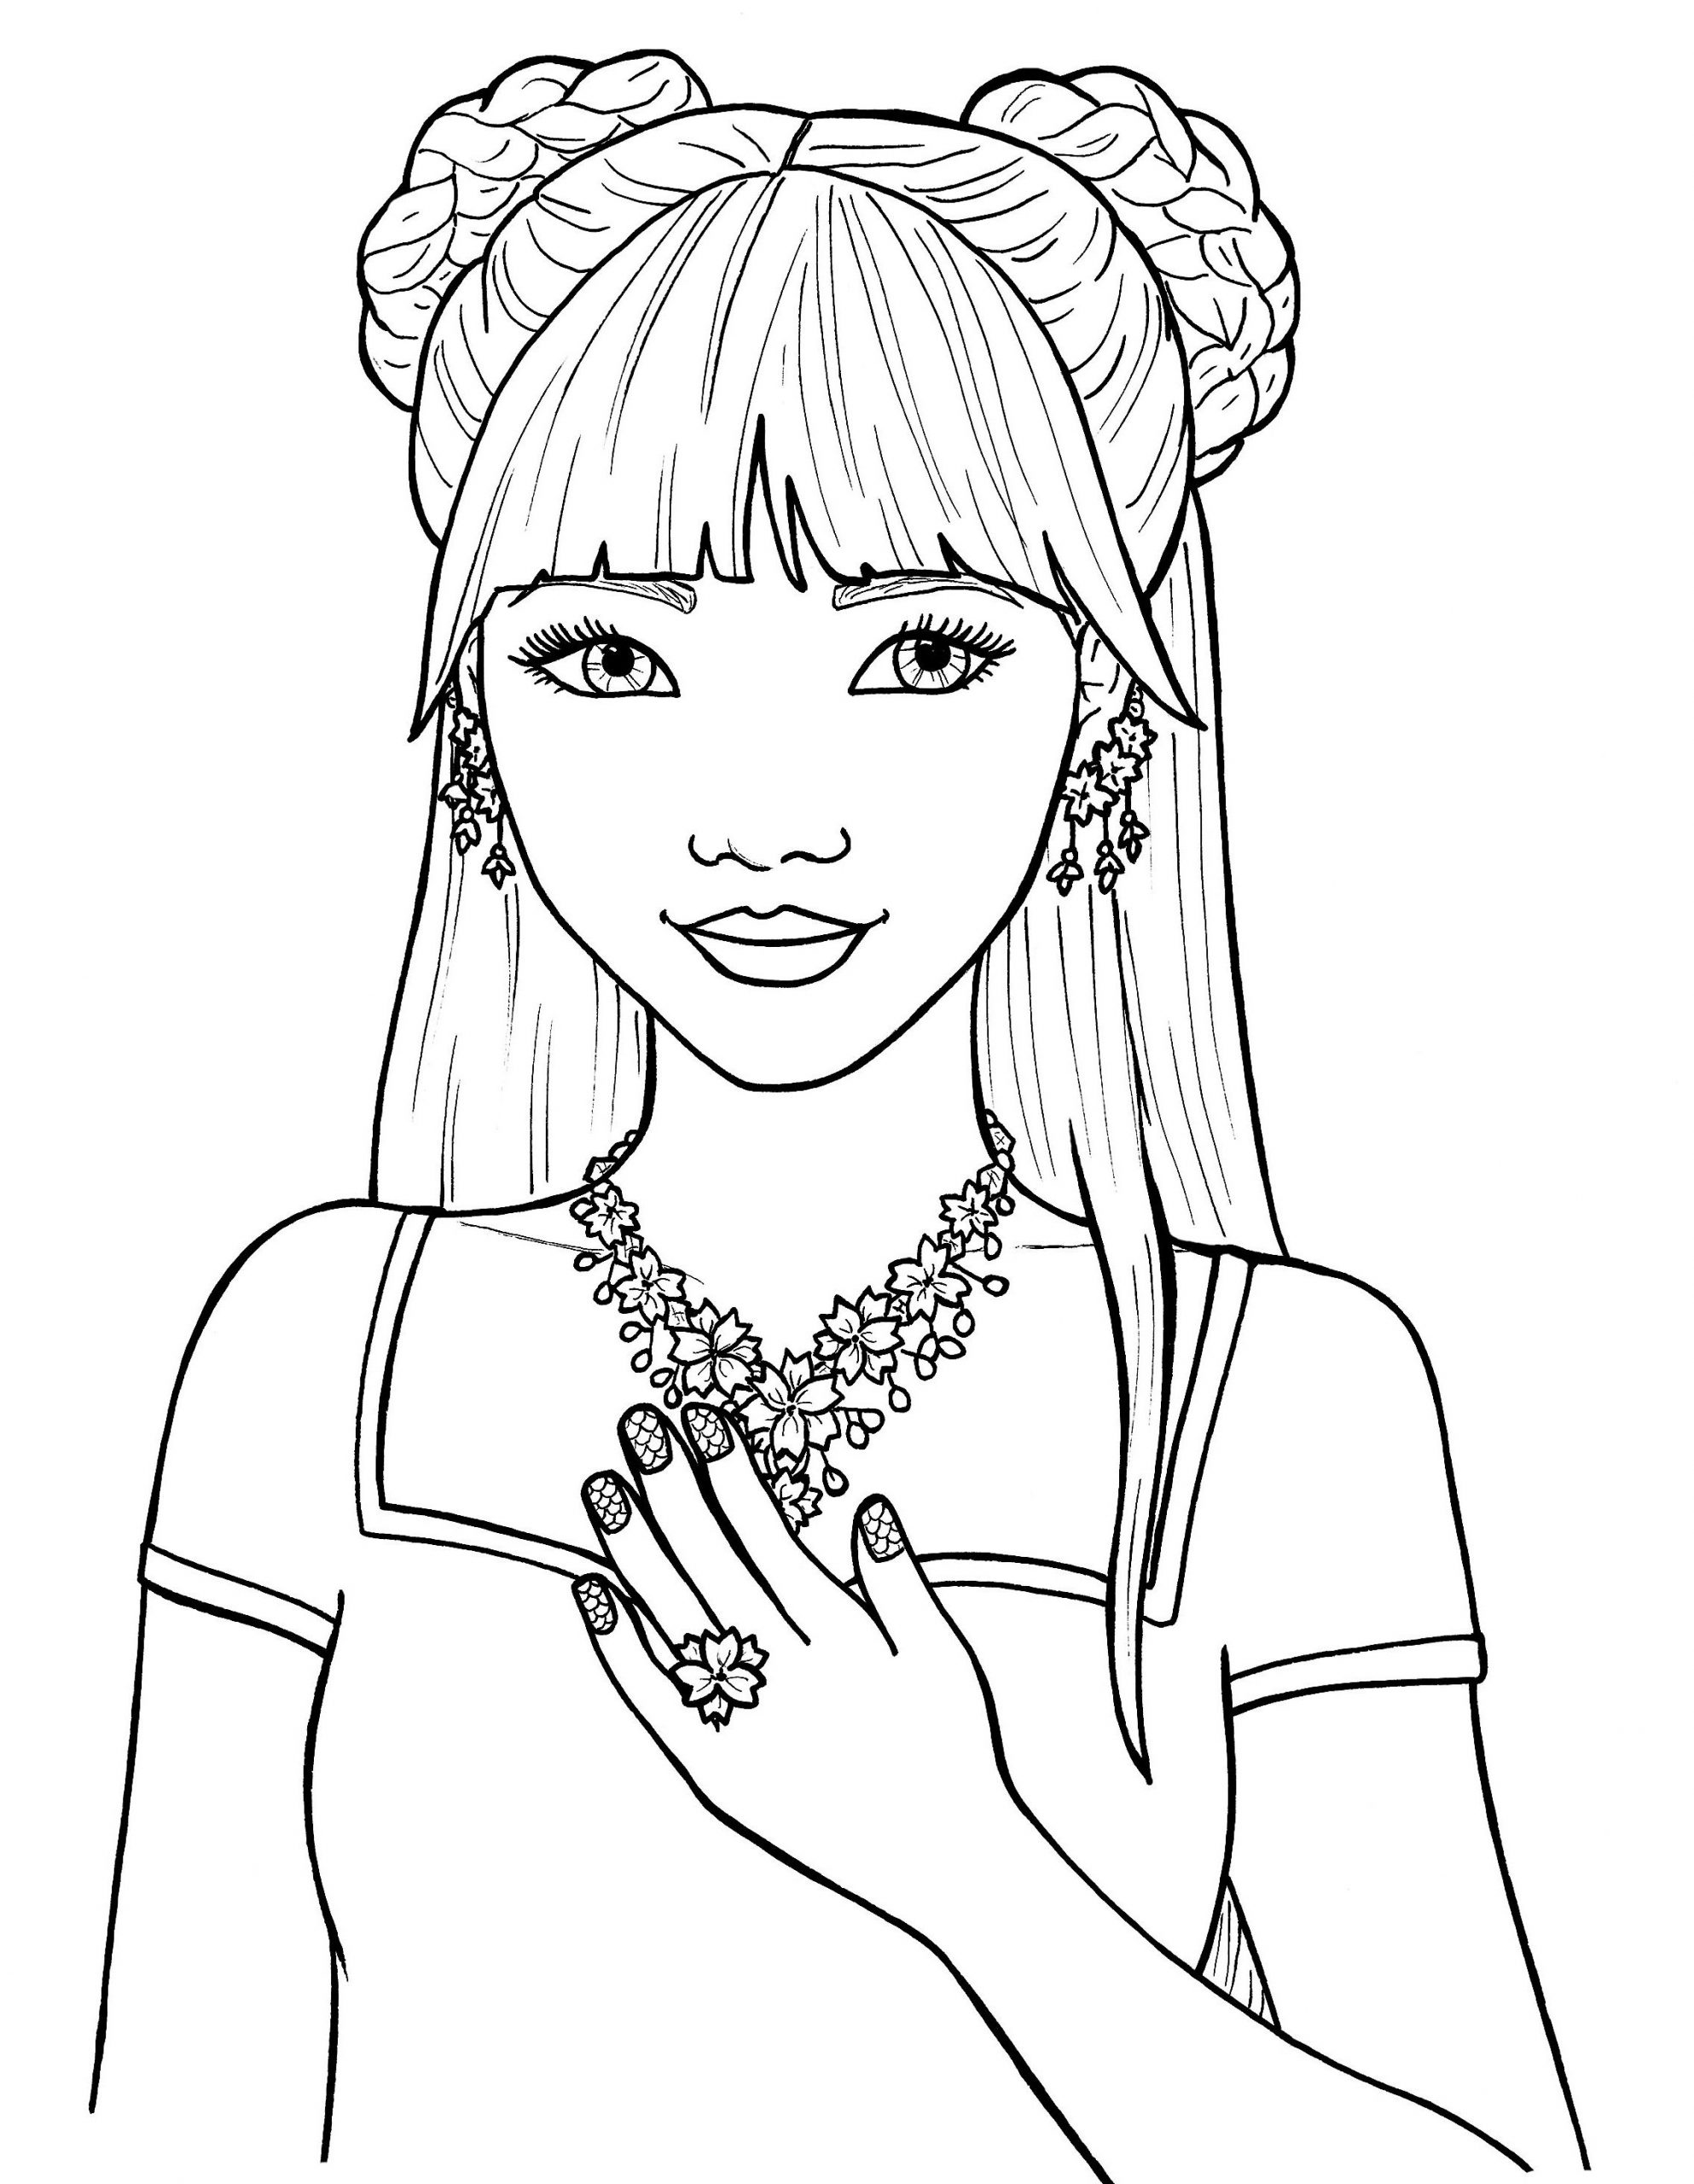 People Hard Coloring Pages - Coloring Home